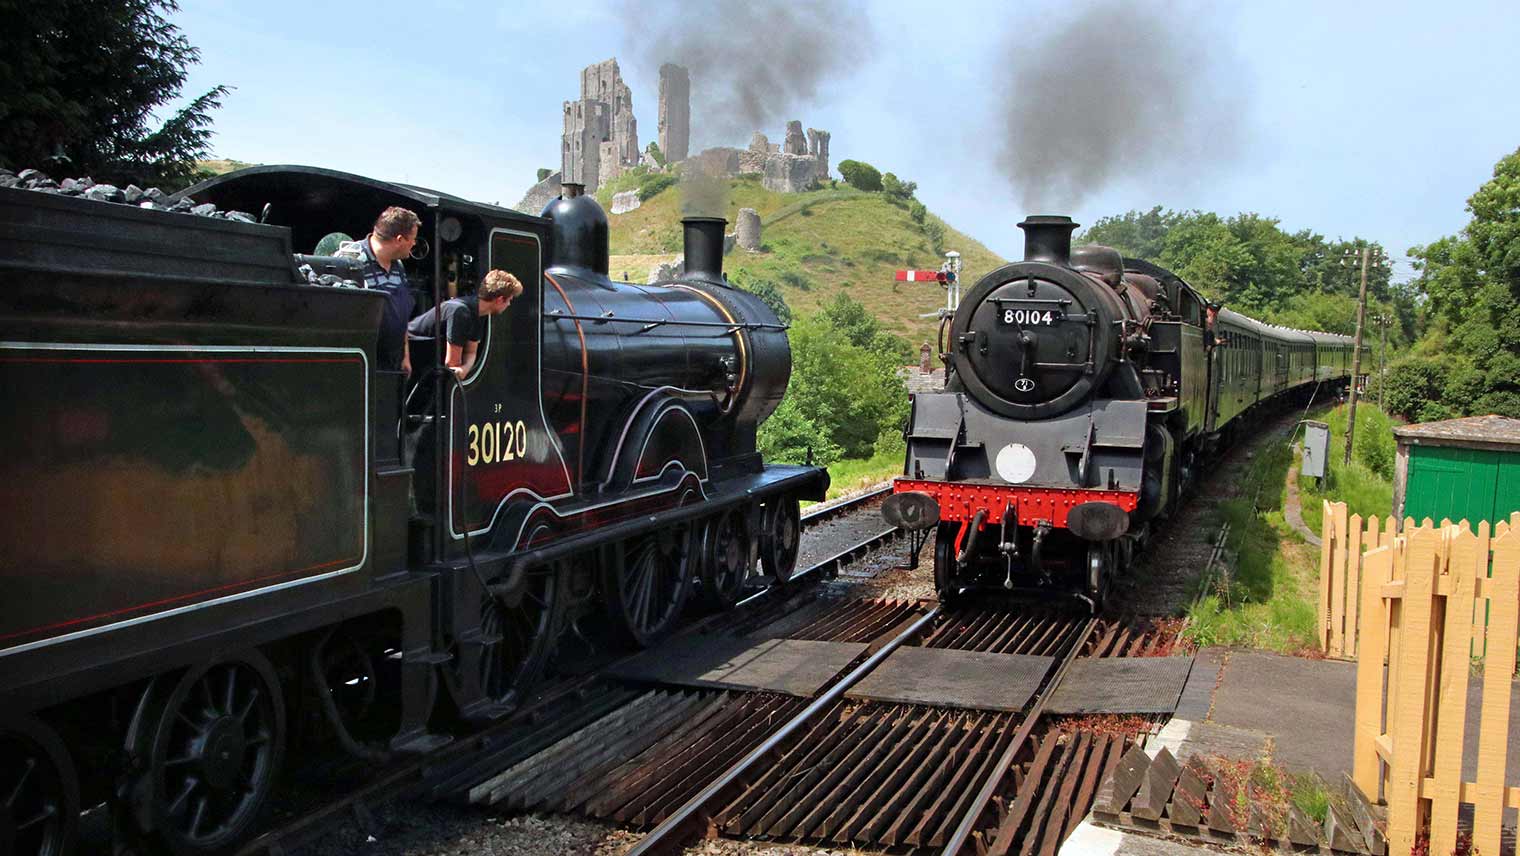 Swanage Railway steam trains passing each other below the ruins of Corfe Castle